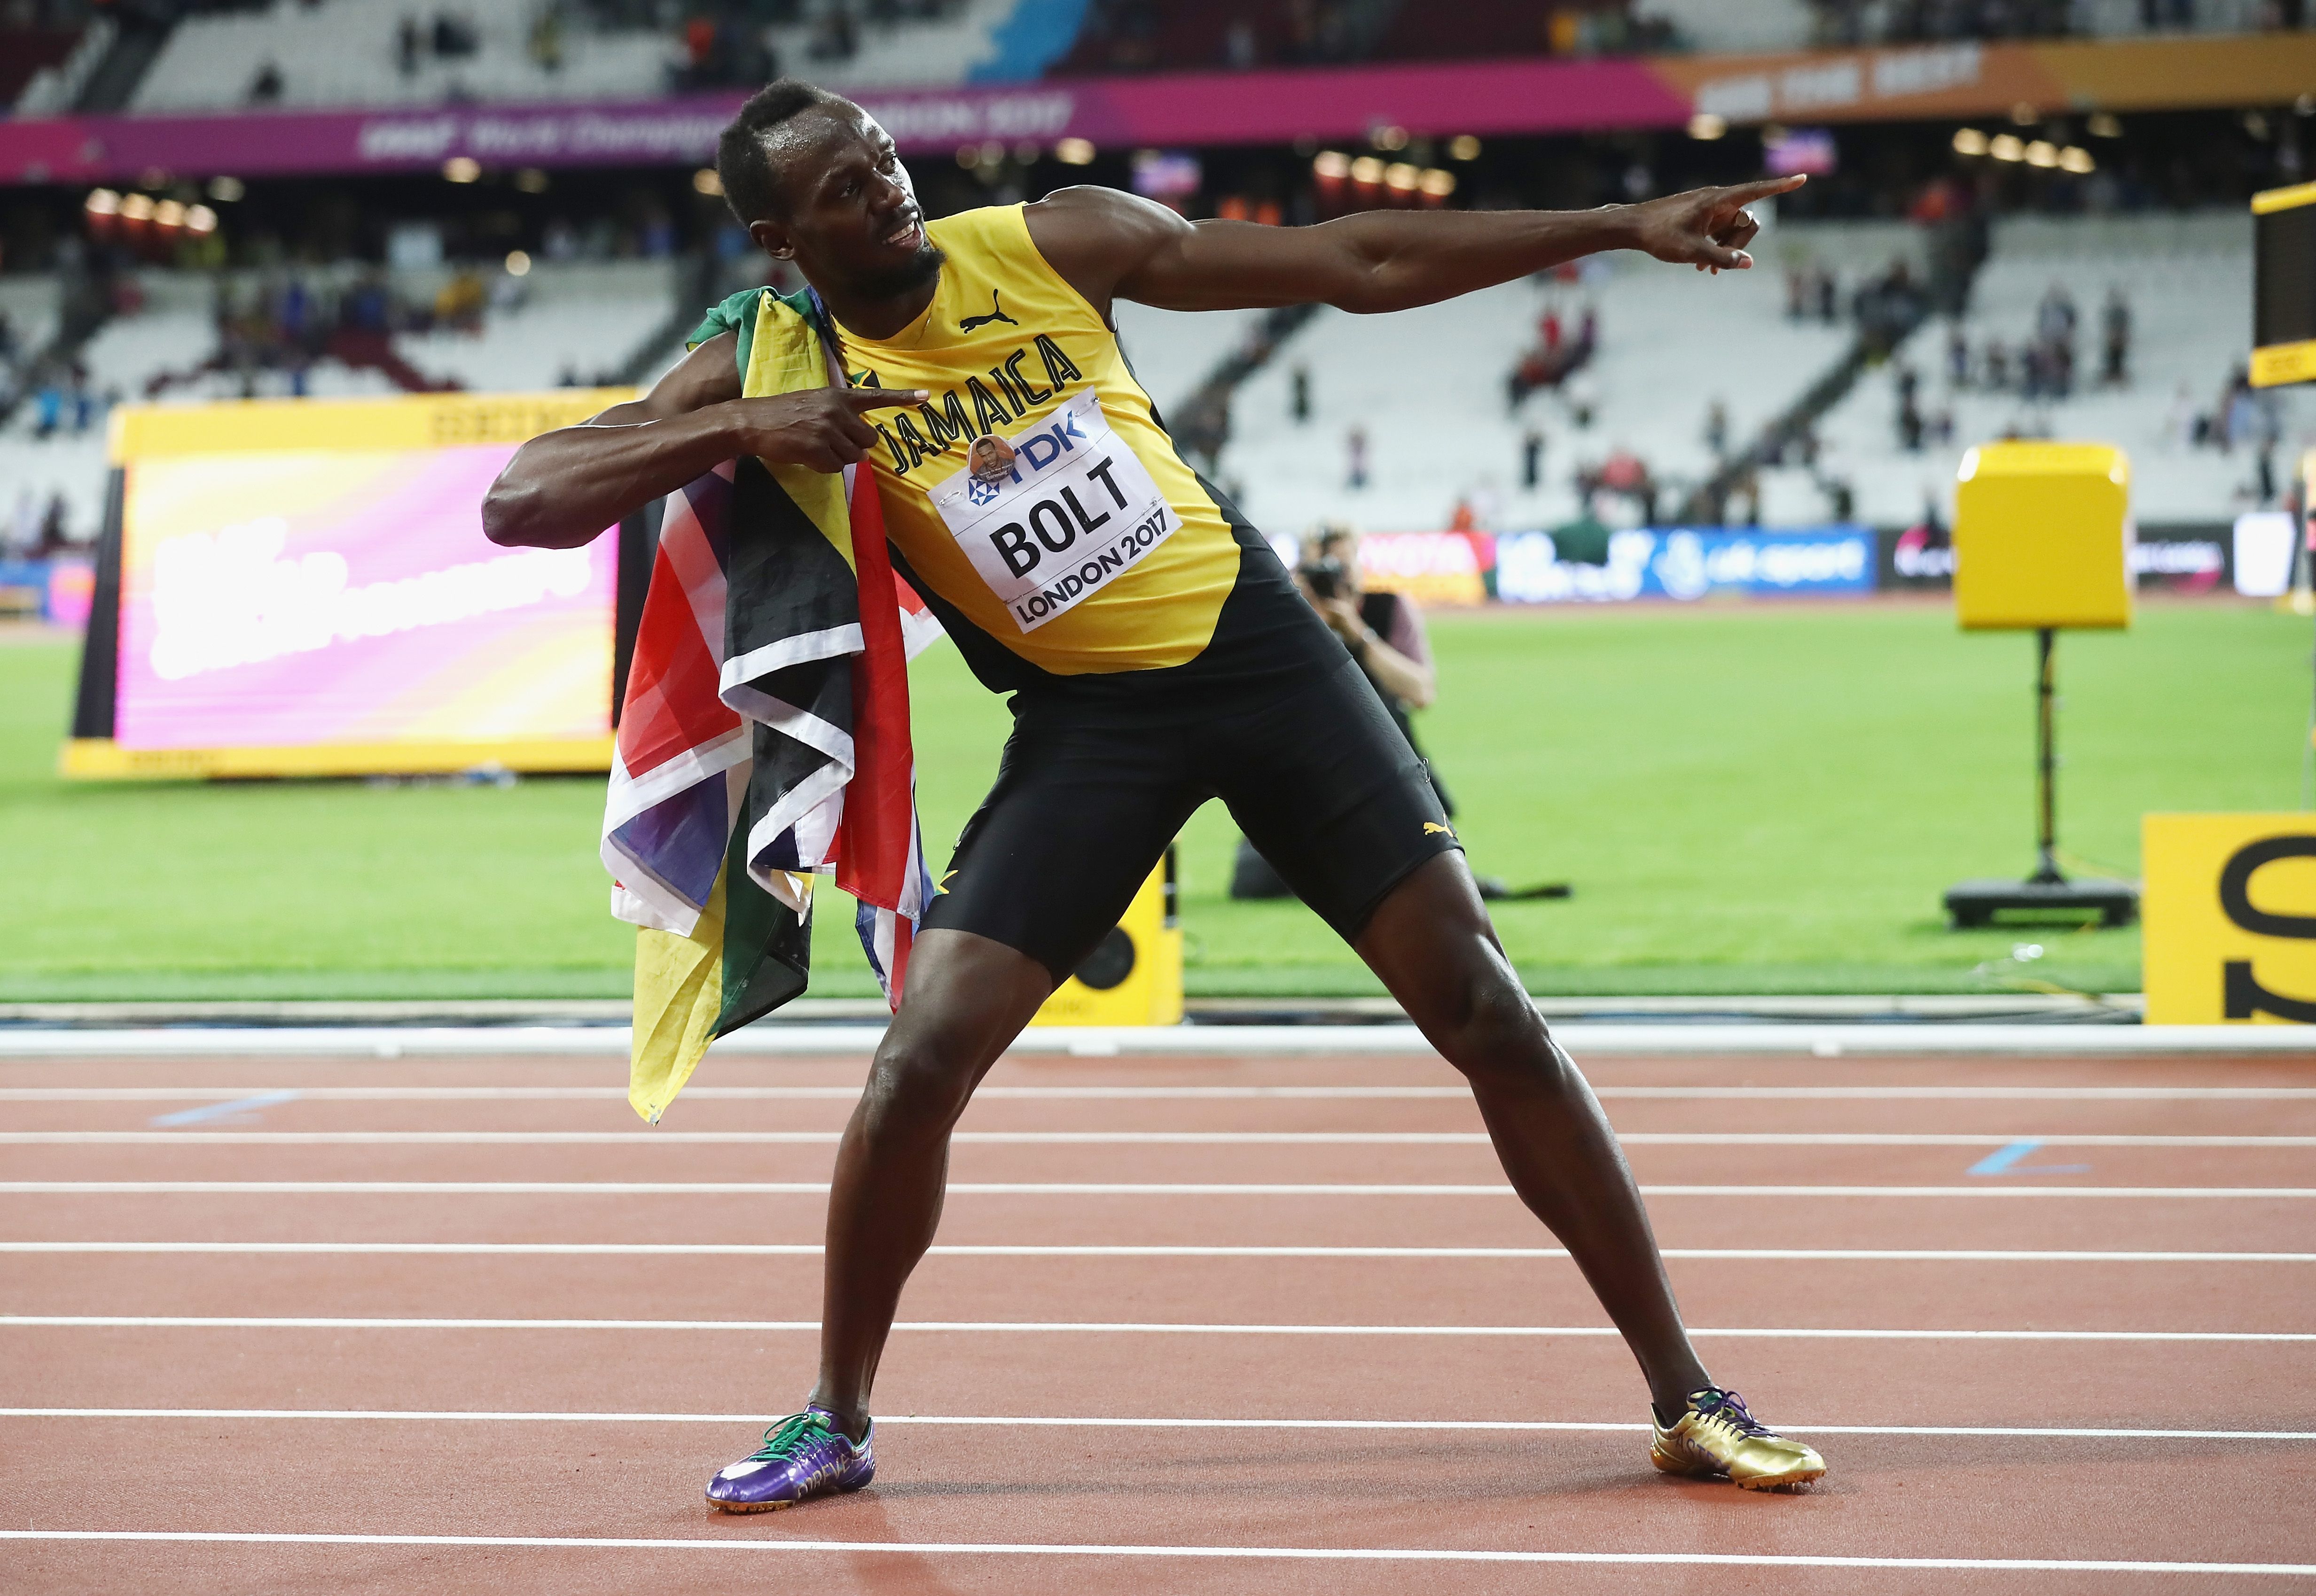 Here's the origin of Usain Bolt's signature victory pose